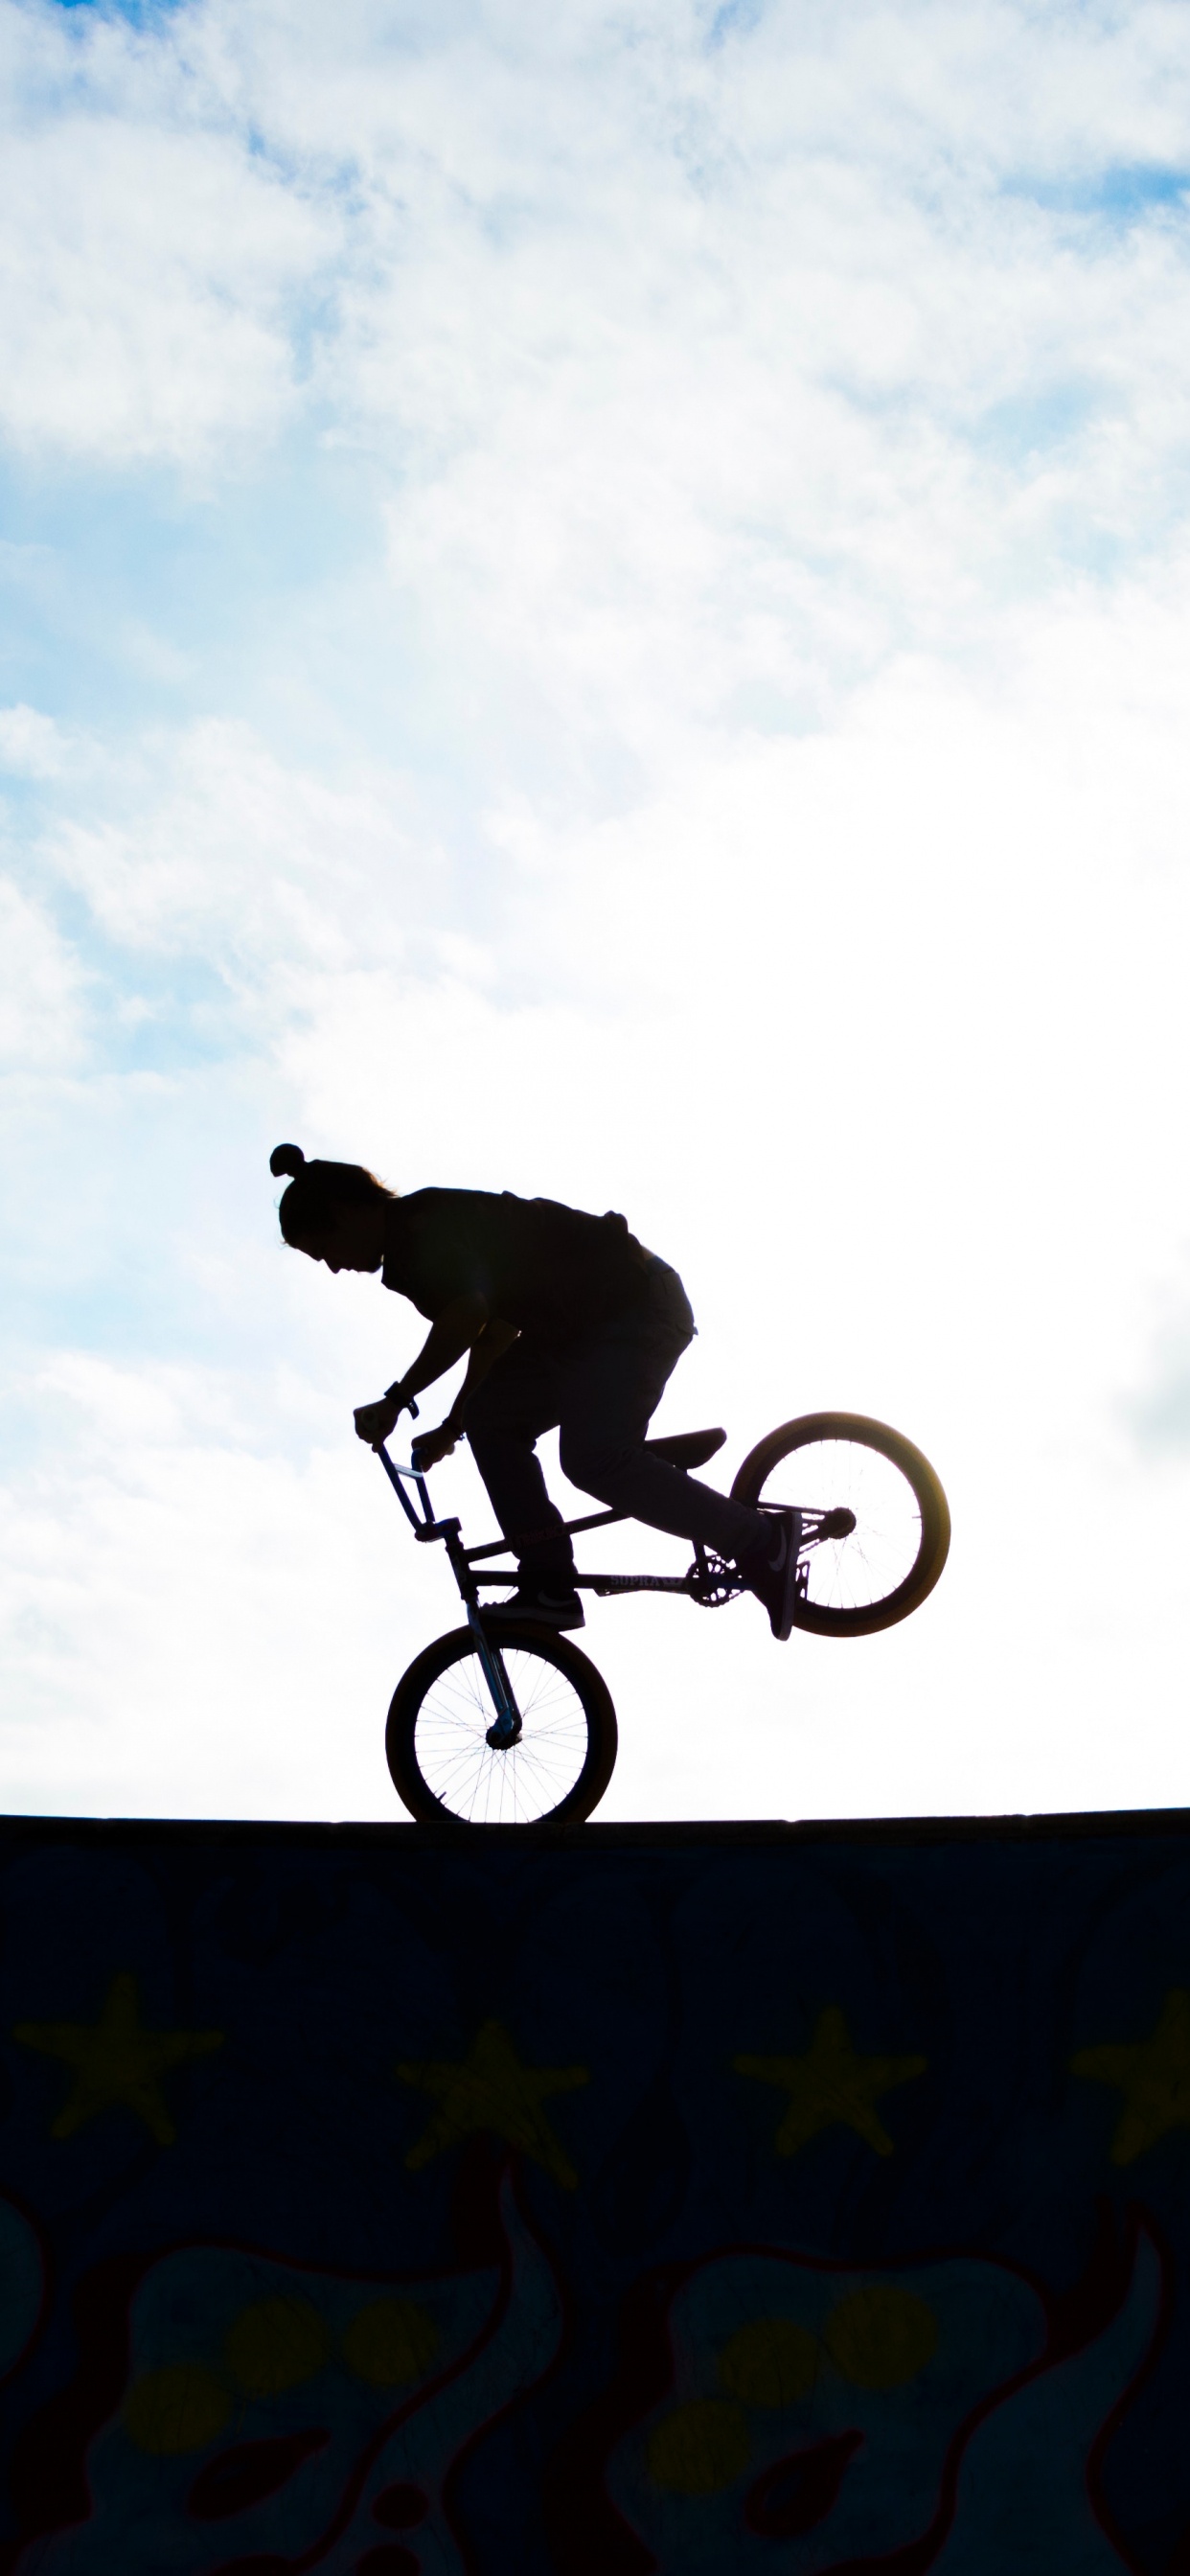 Man Riding Bicycle on Mid Air Under Blue Sky During Daytime. Wallpaper in 1242x2688 Resolution